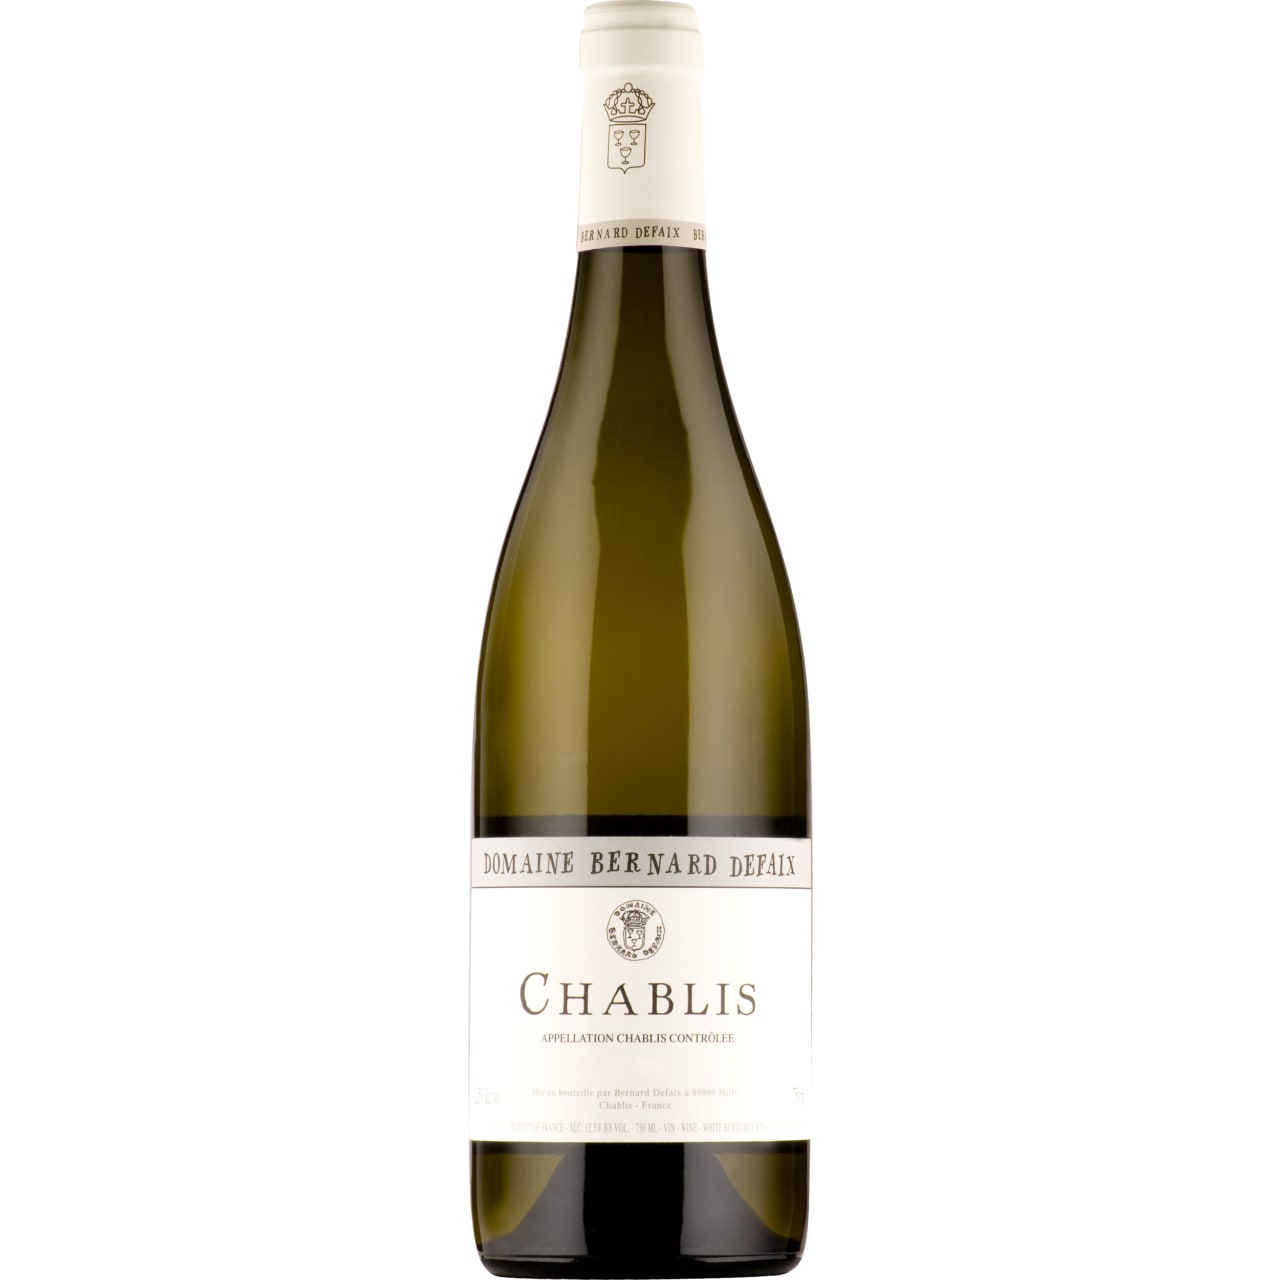 A fine brilliant yellow colour. On the aromas, mineral notes are dominant combined with delicate touches of green apple, lemon and grapefruit.